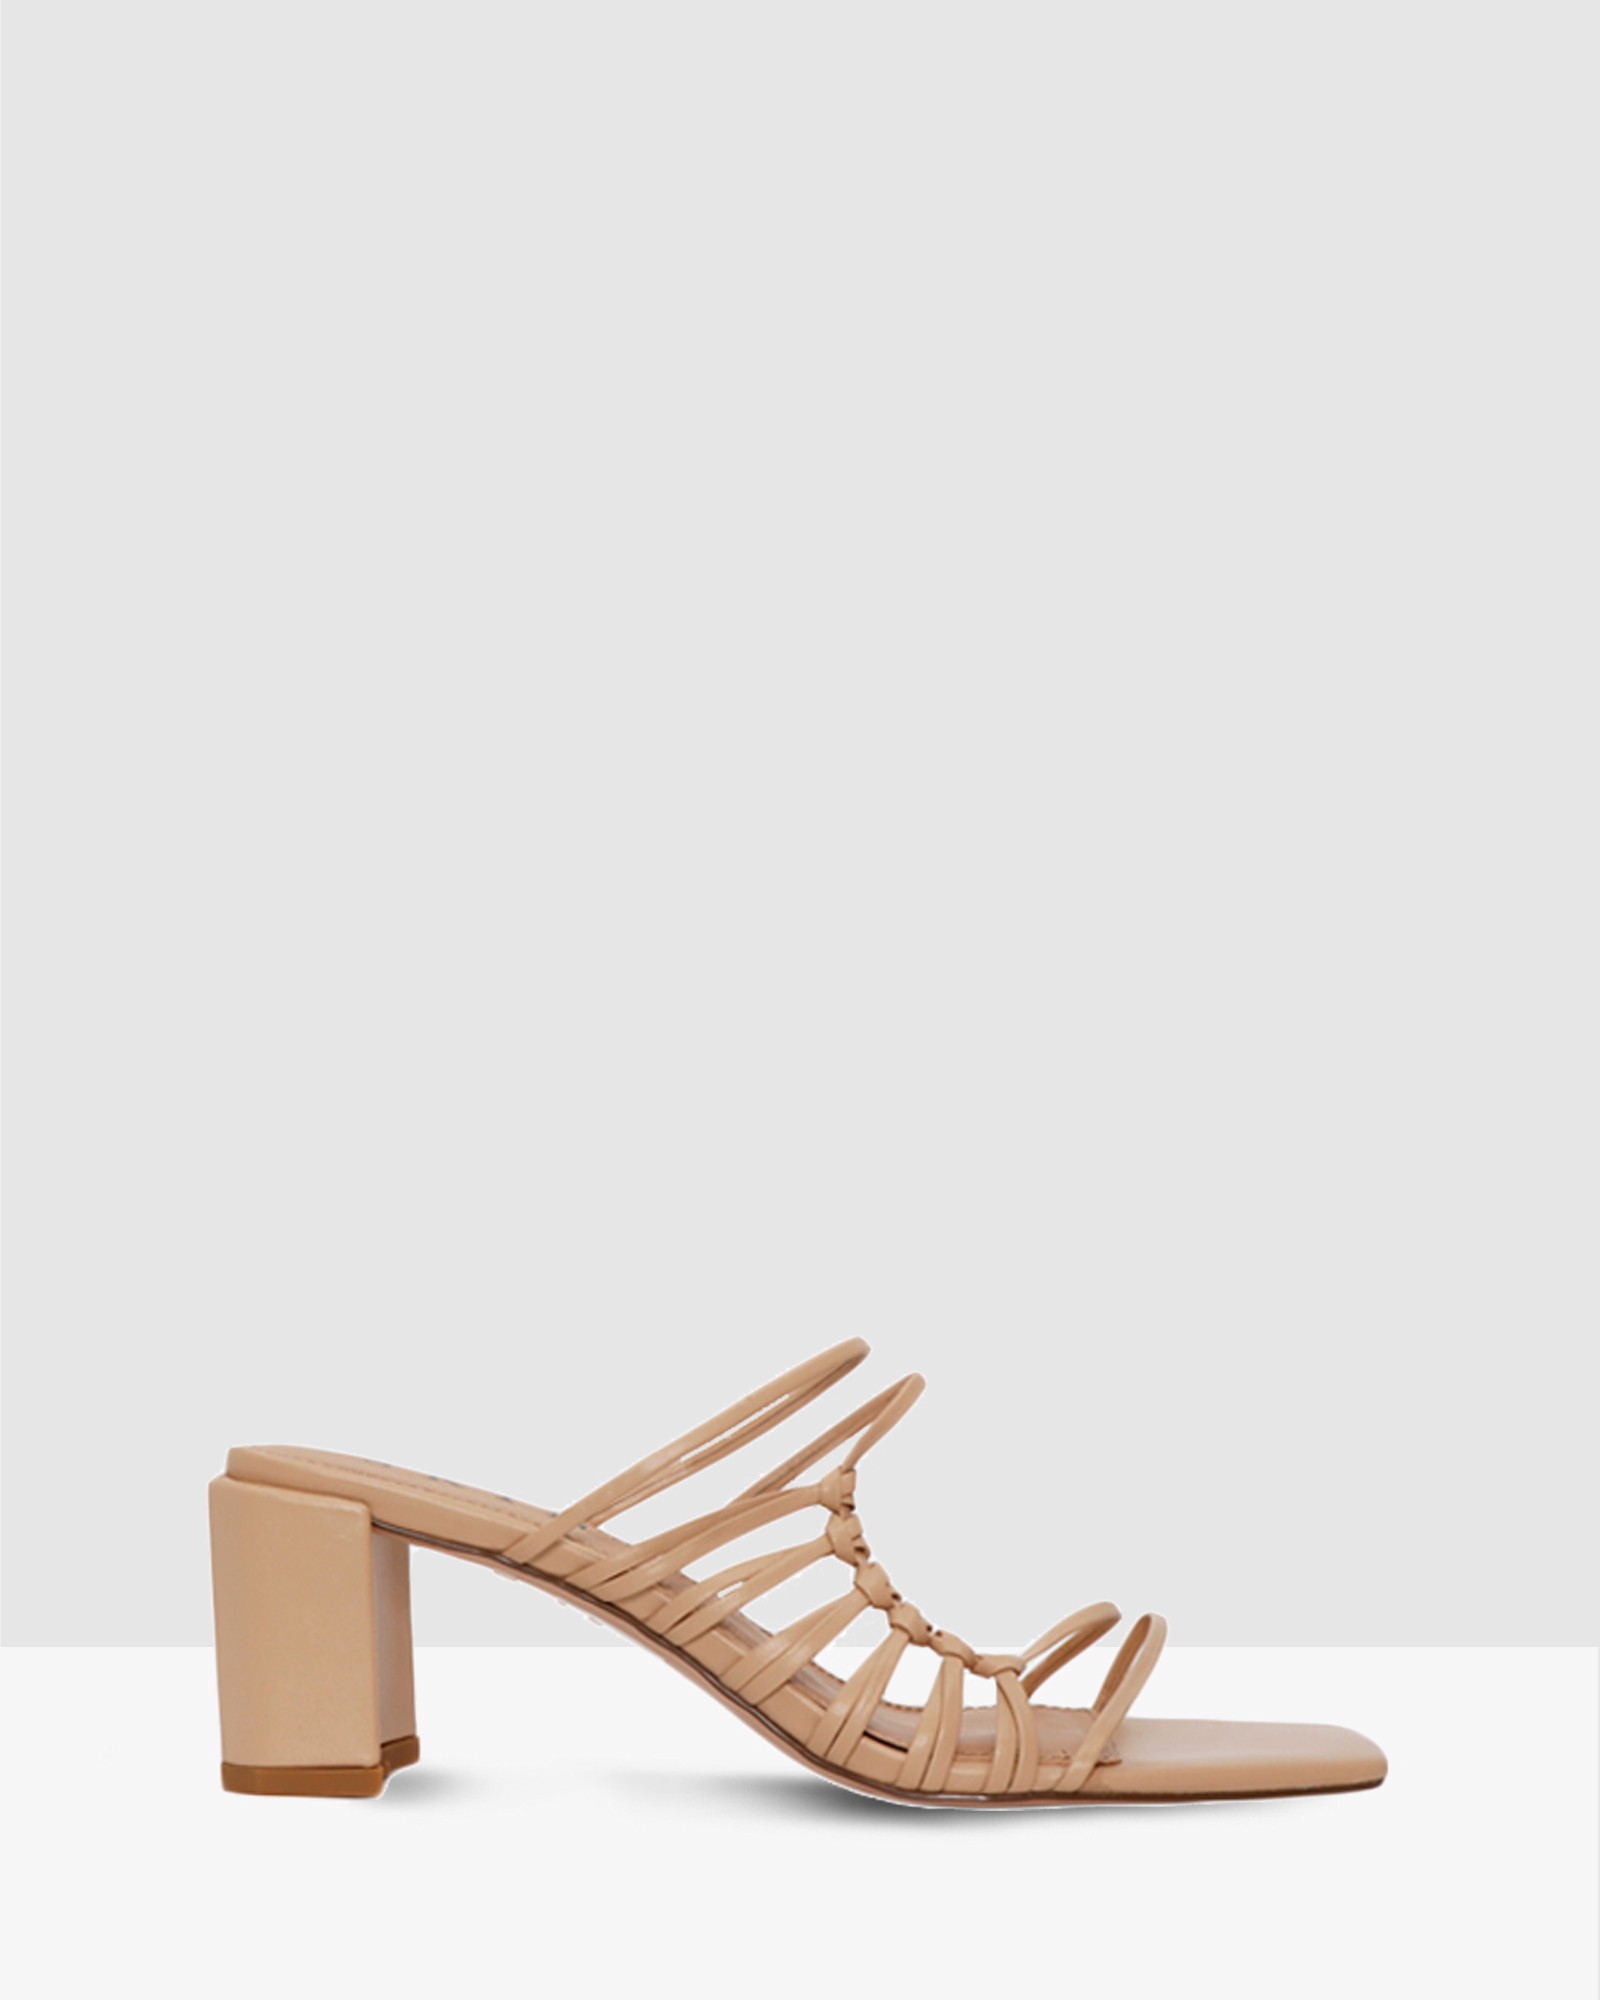 Samson NUDE by Skin | ShoeSales